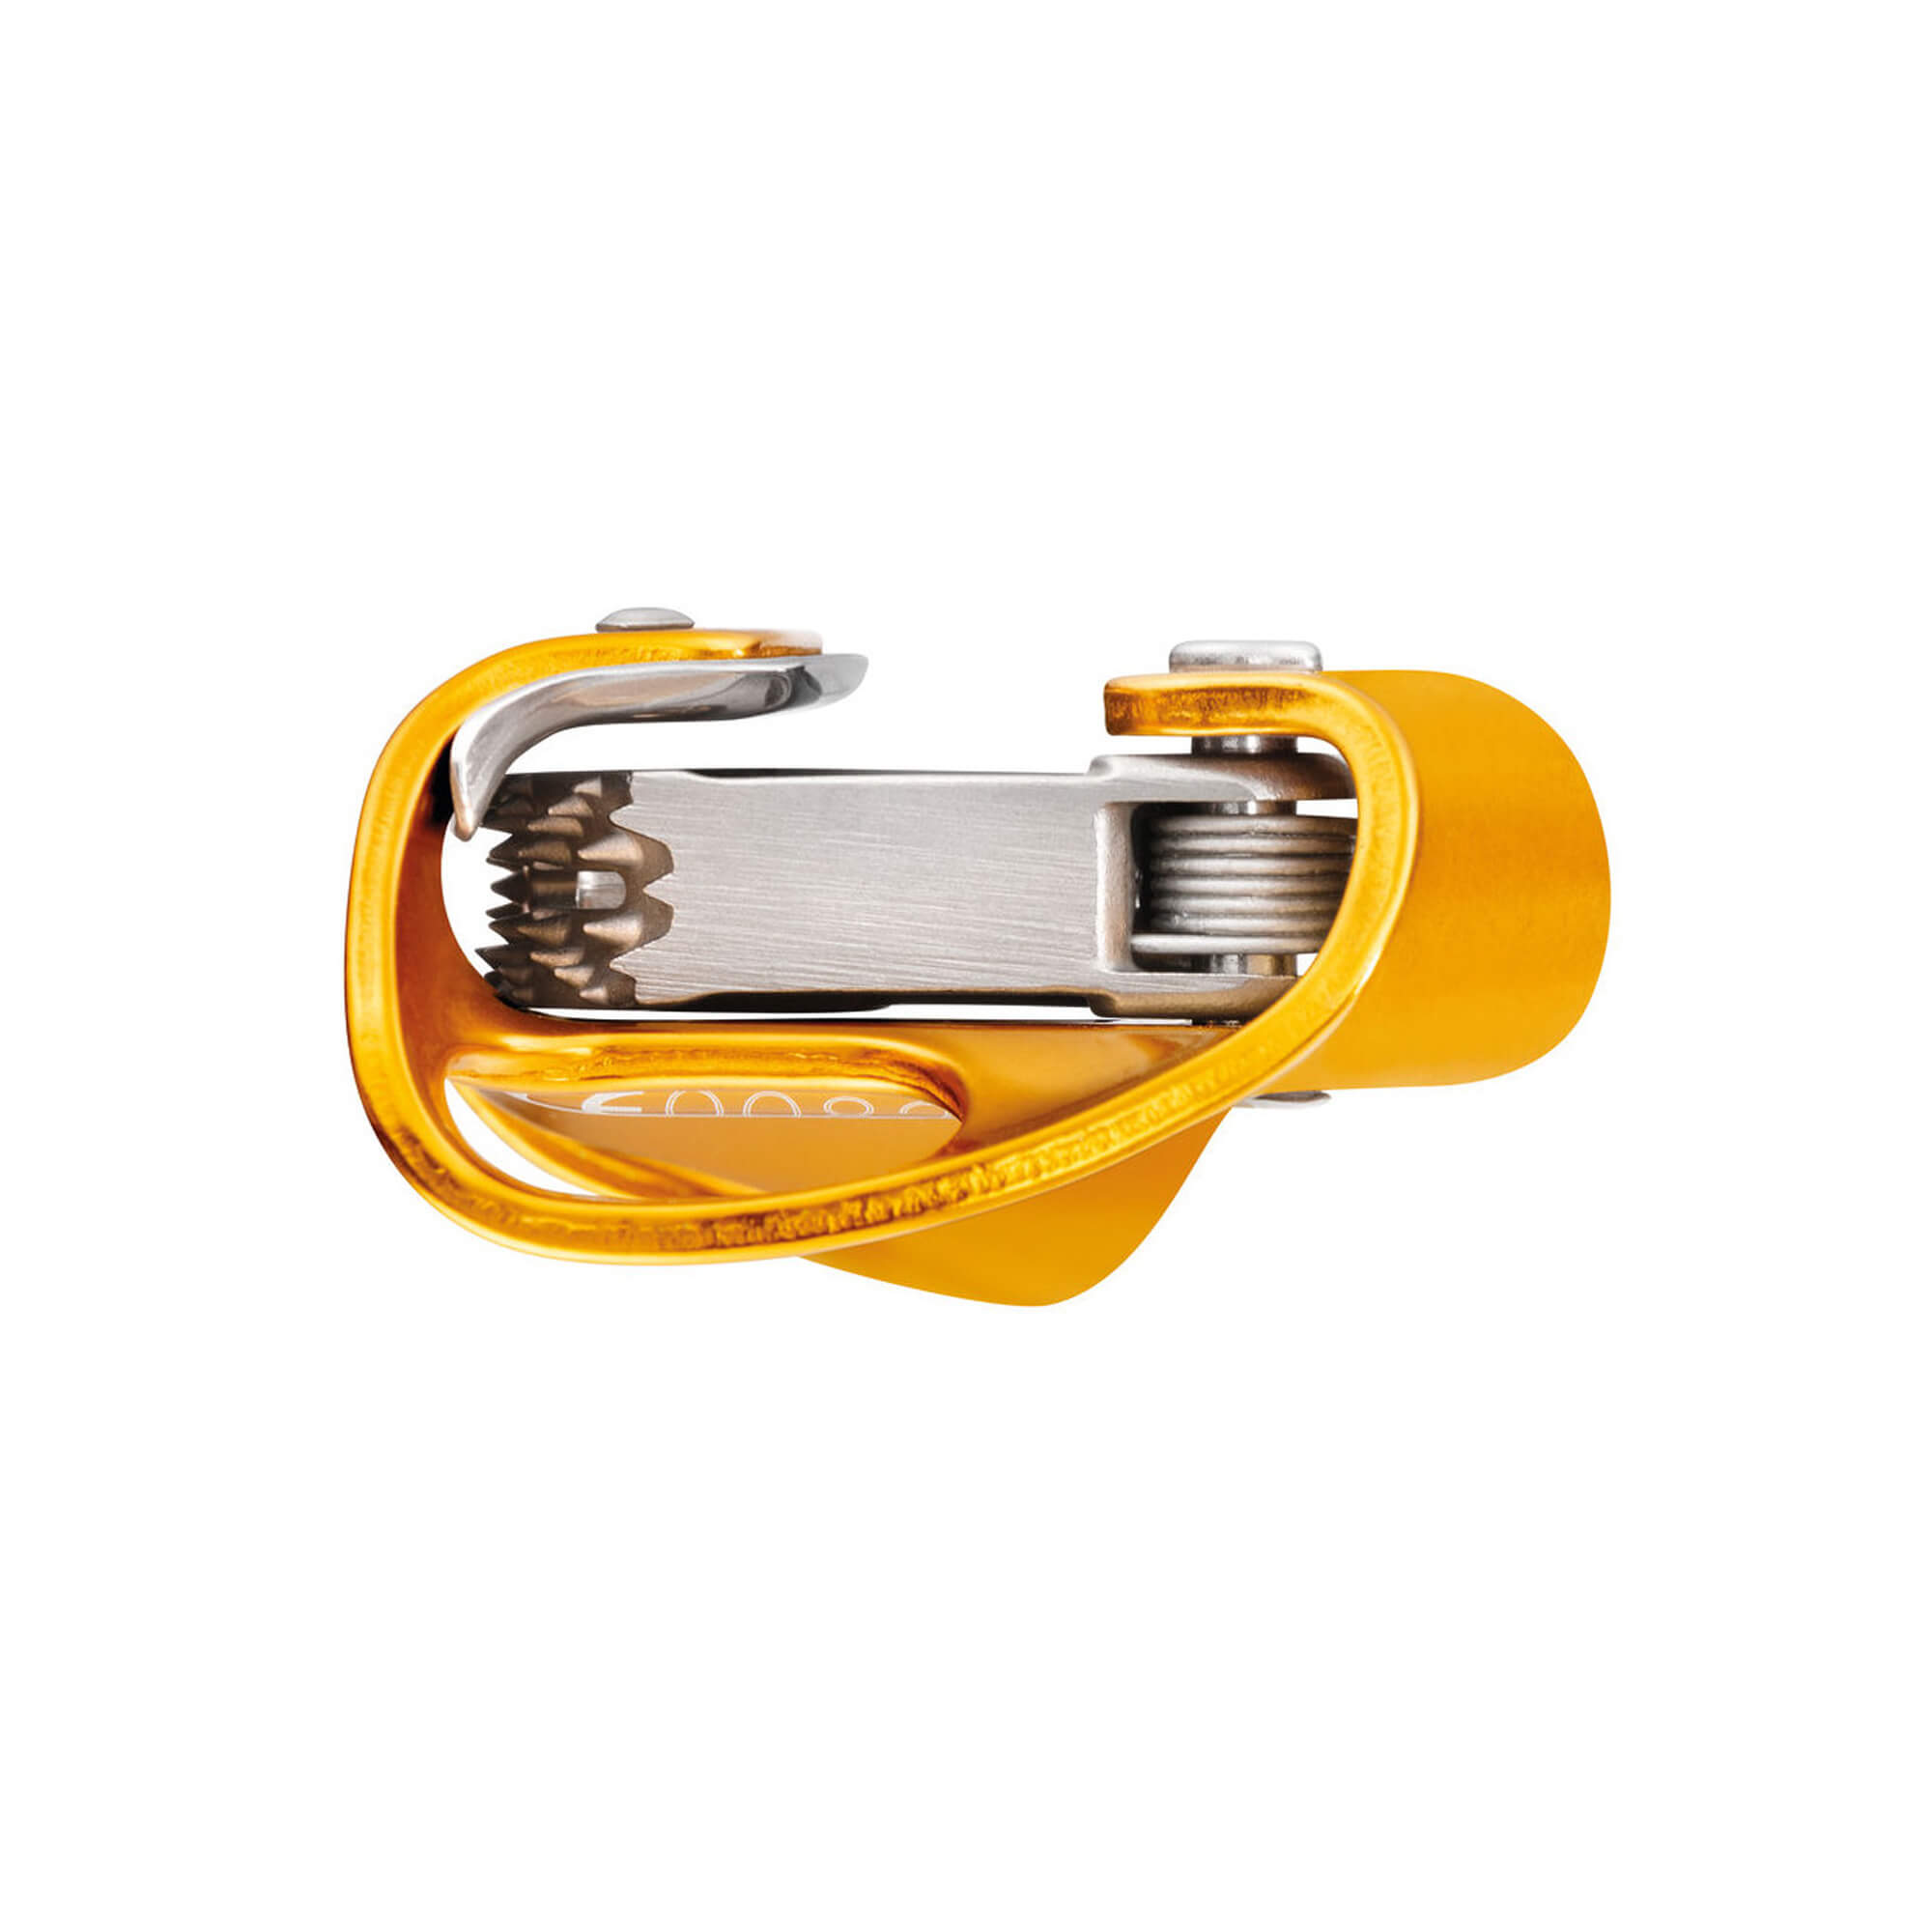 Petzl Croll Chest rope clamp for climbing rope